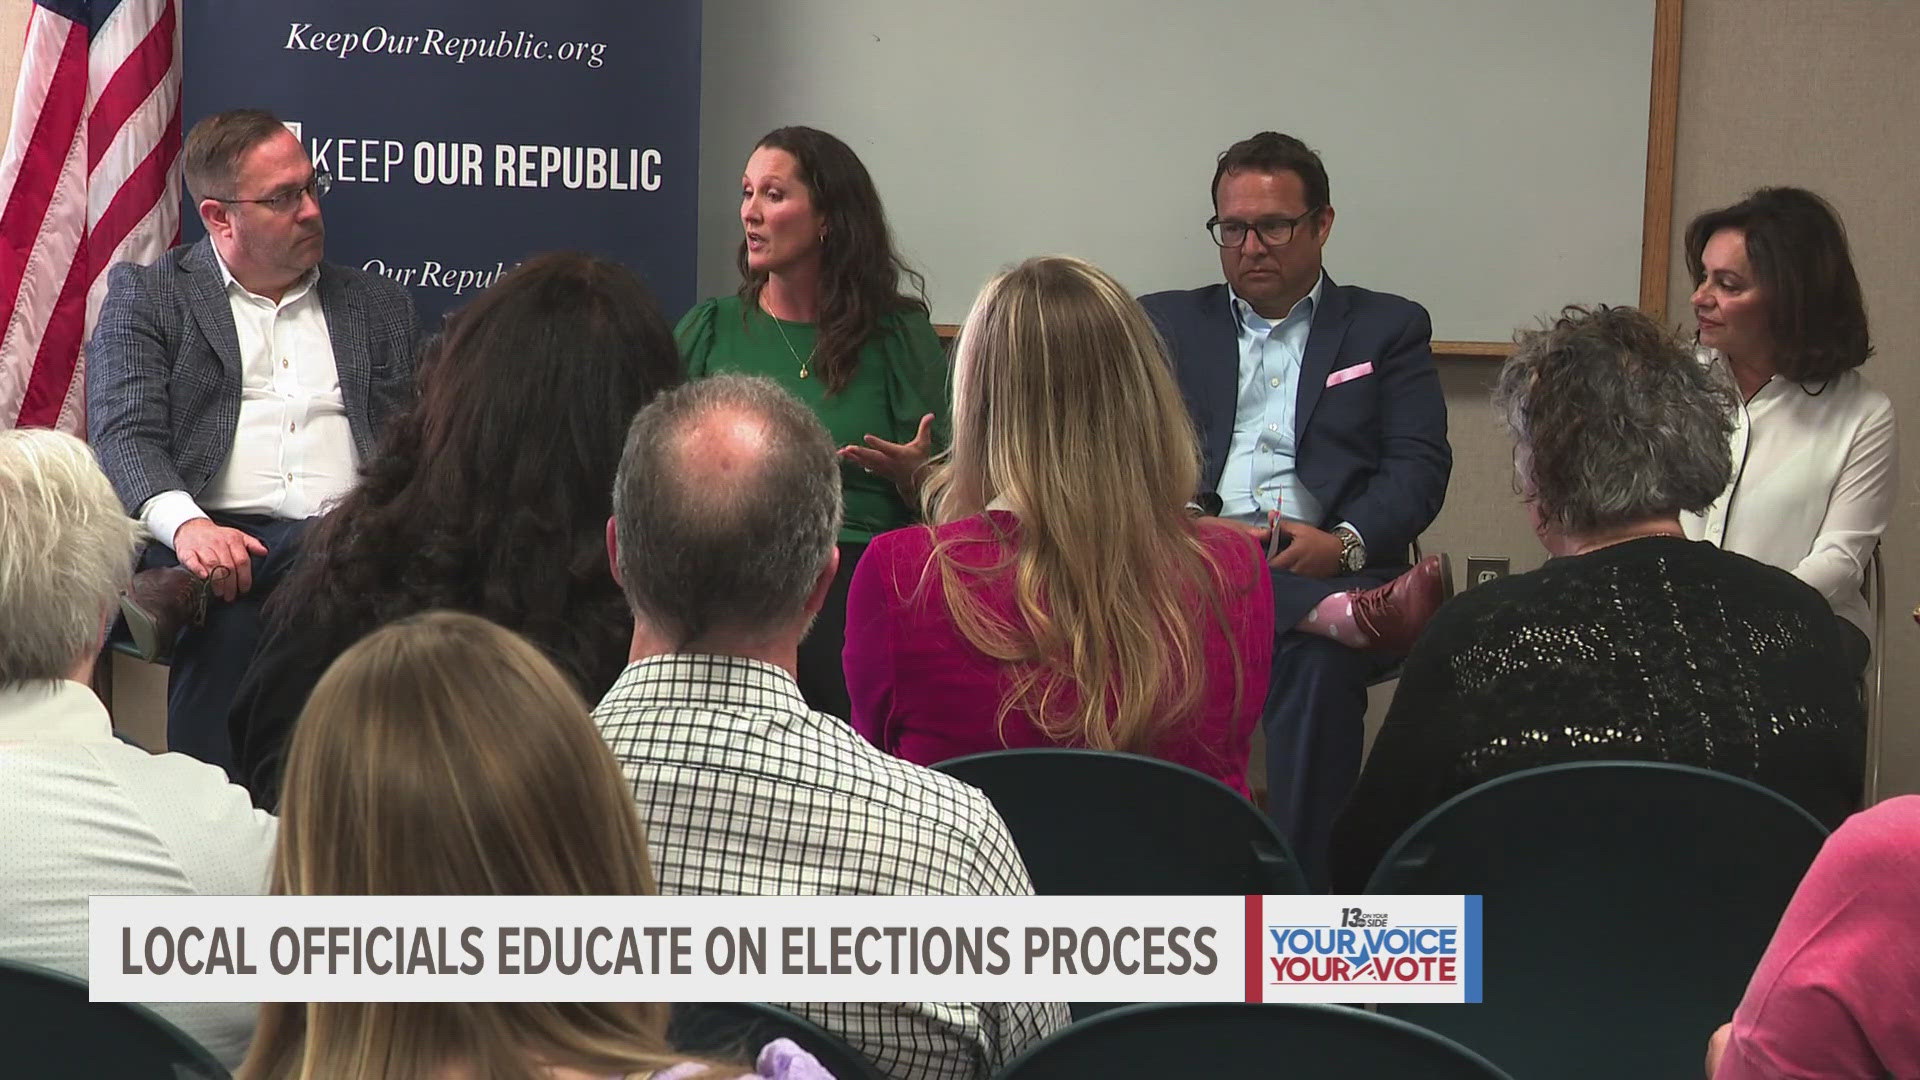 Local officials educate on elections process in effort to increase trust and transparency.